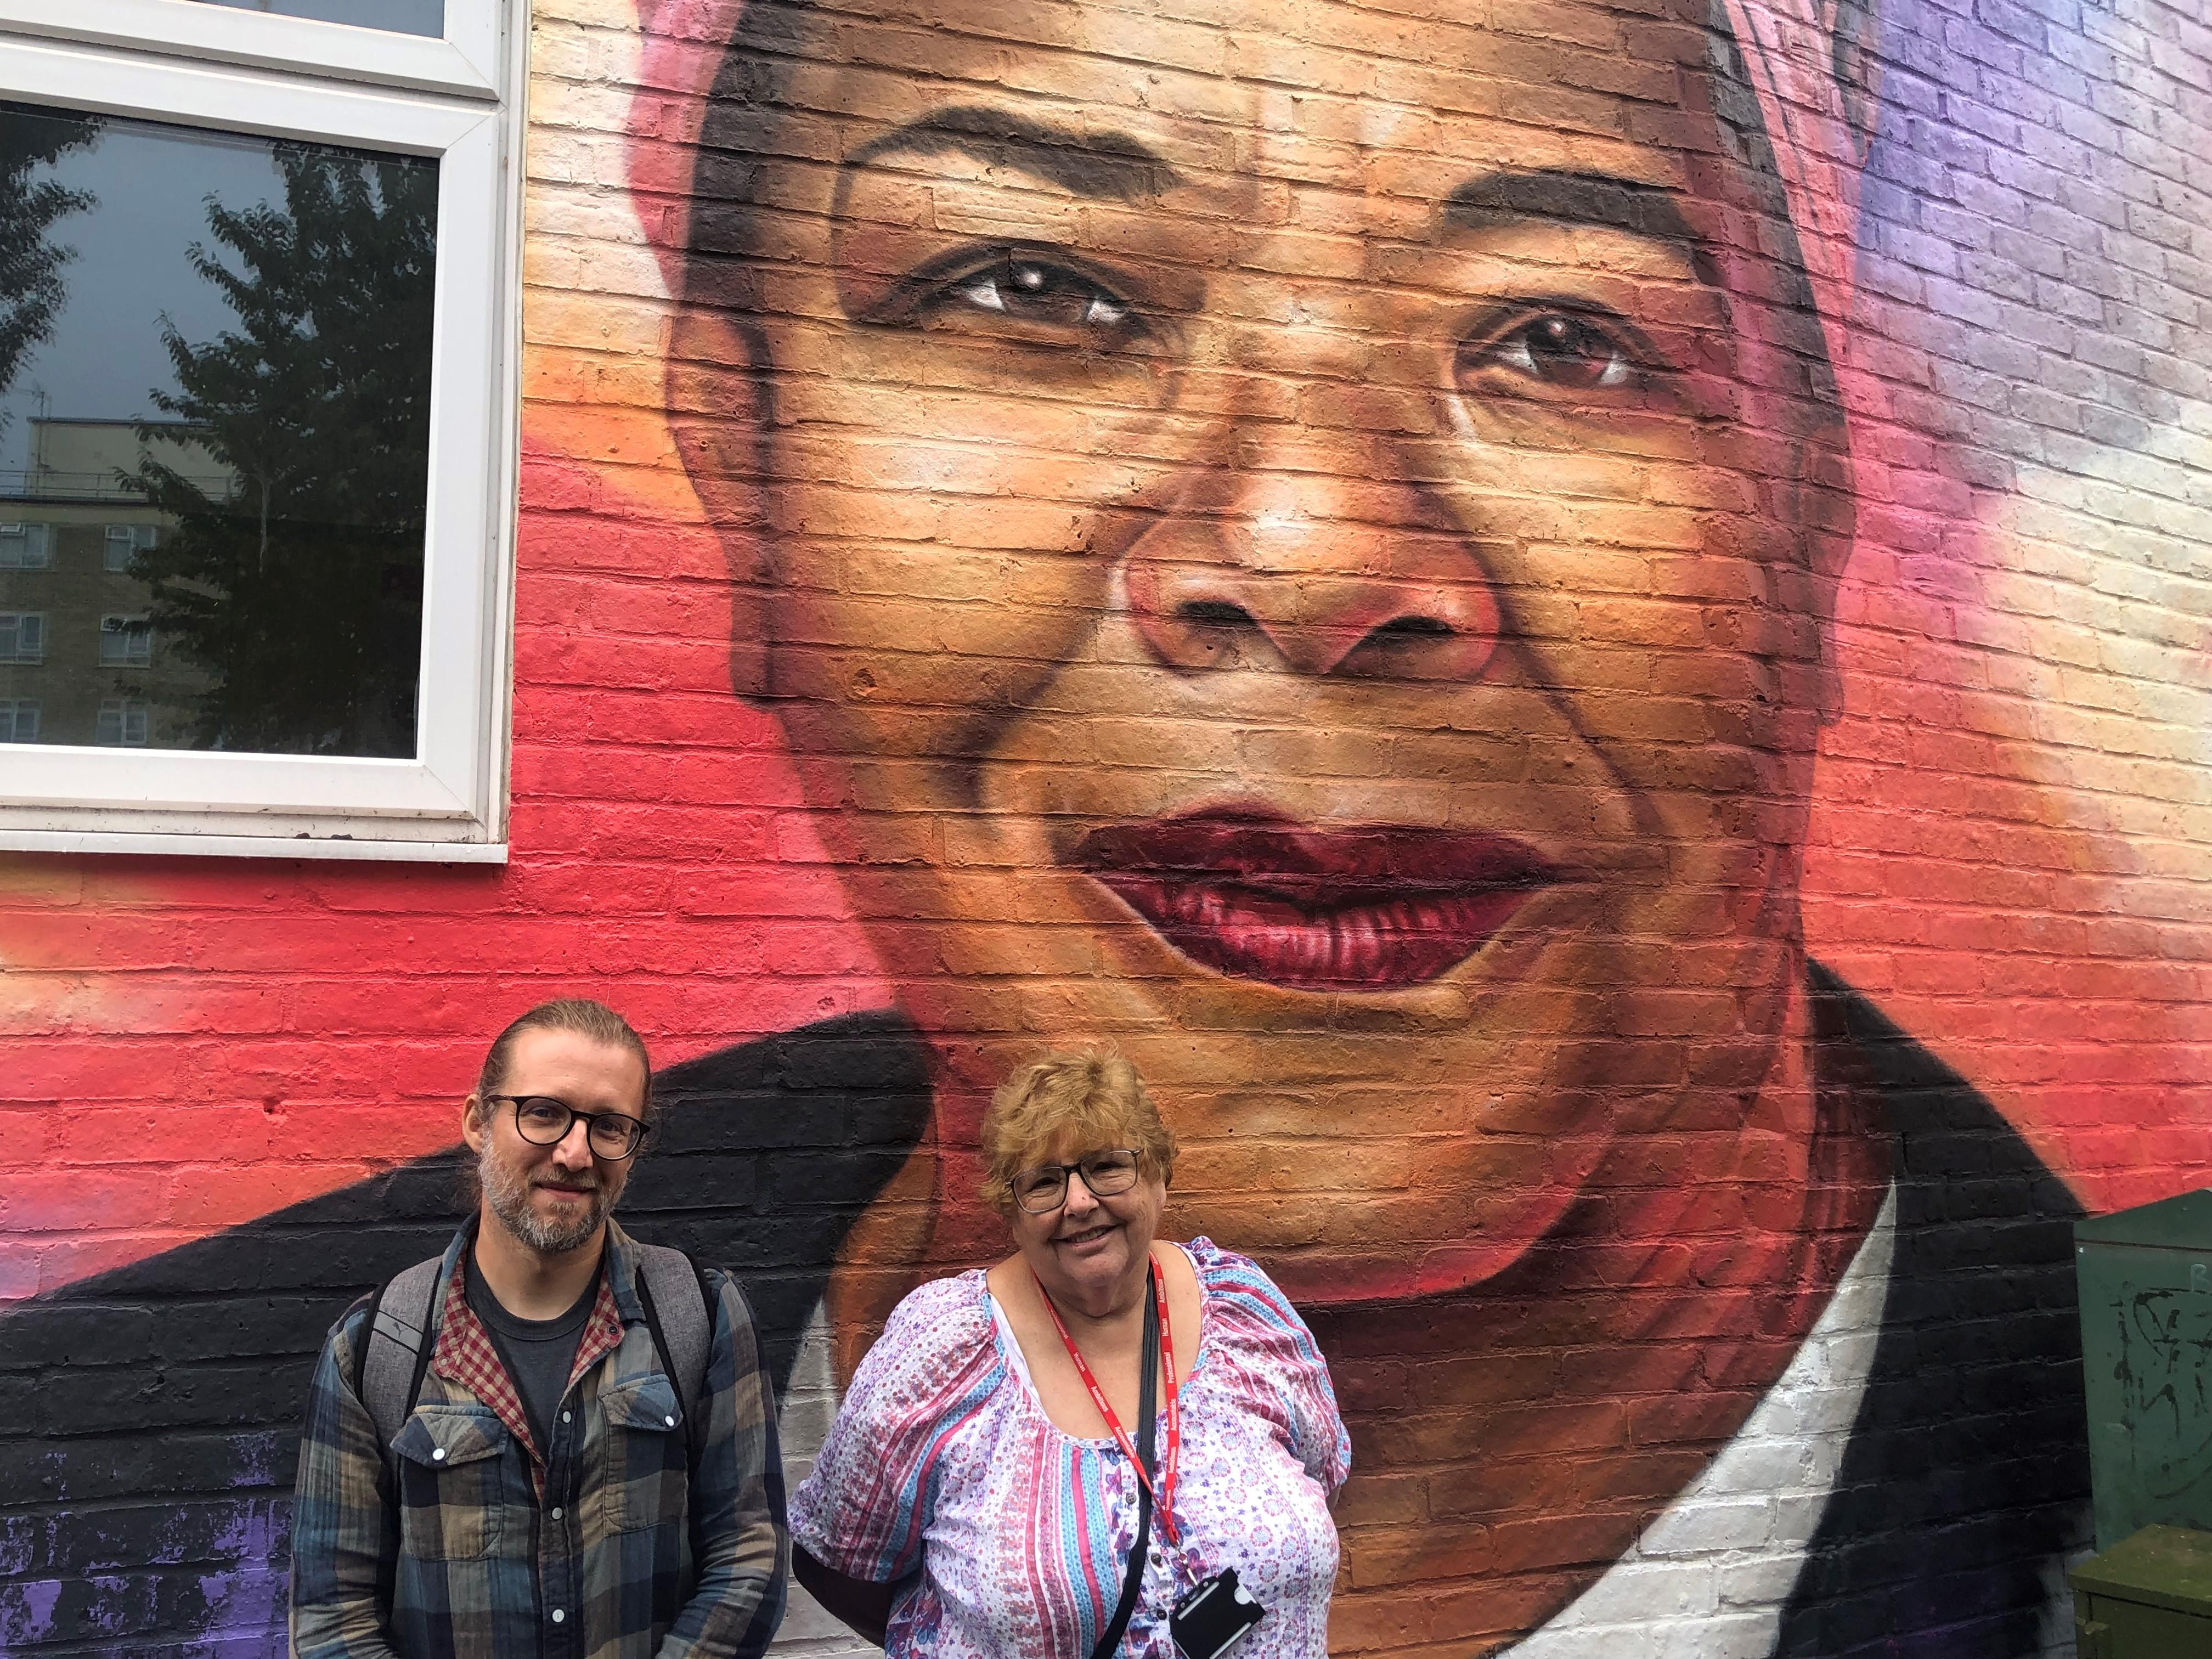 Cllr Zena Brabazon with the renowned artist WOSKerski in front of the Maya Angelou mural at the family centre that bears the late poet's name.